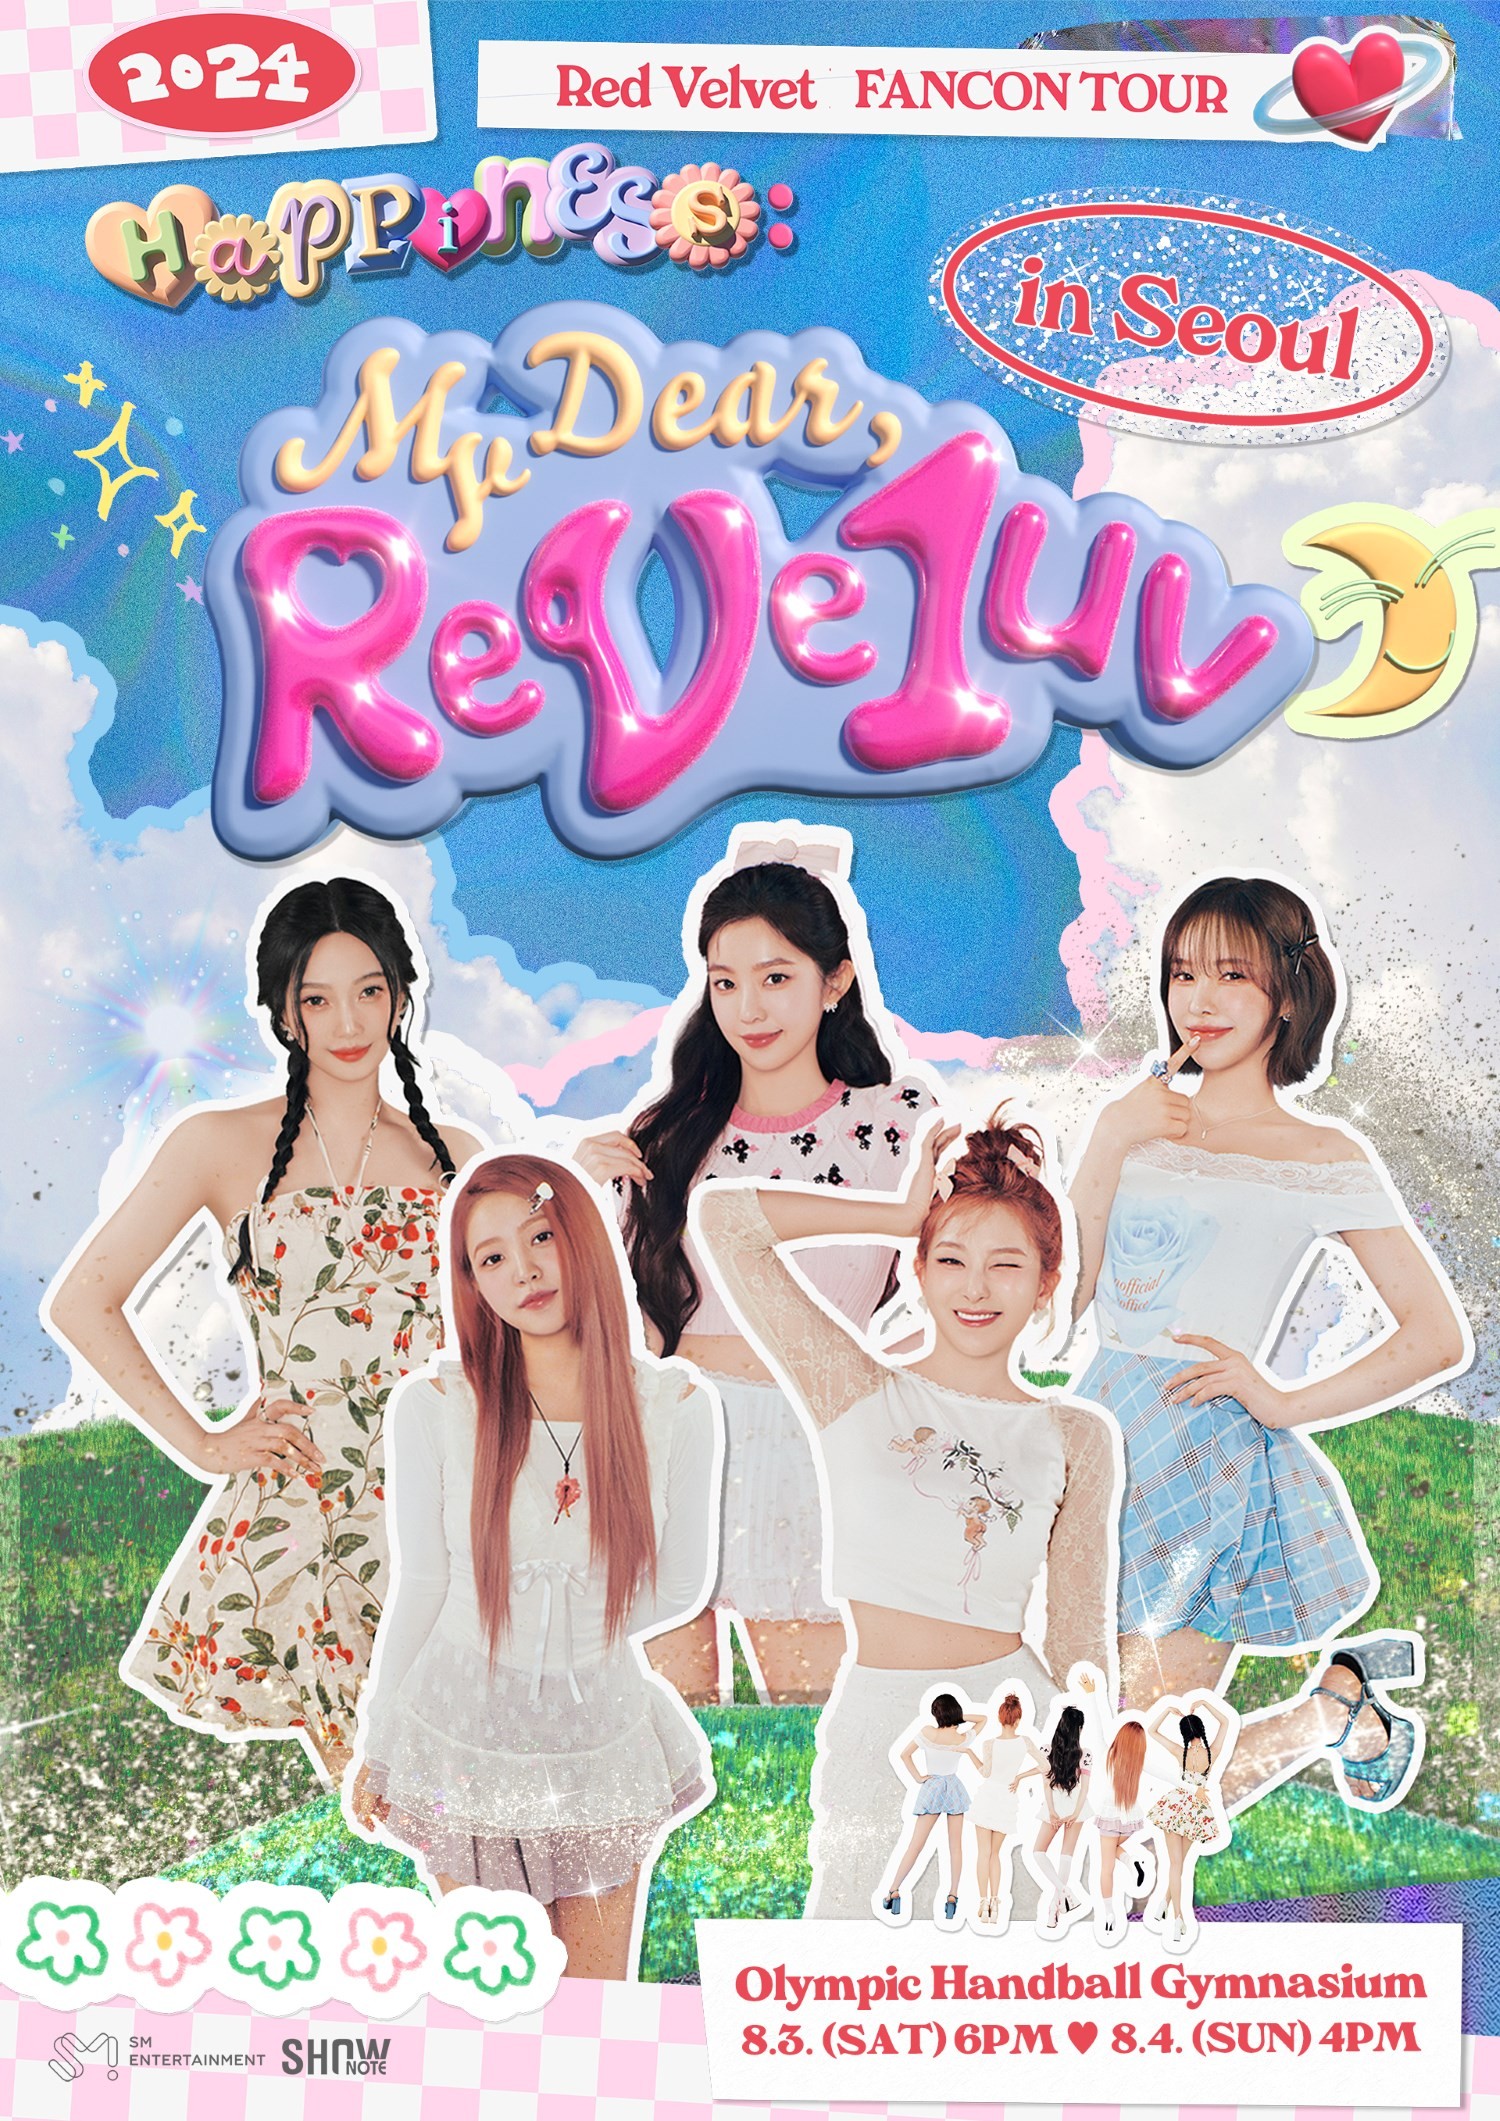 Red Velvet, Fan-con Sold Out… “Cosmic Power, Unchanging”